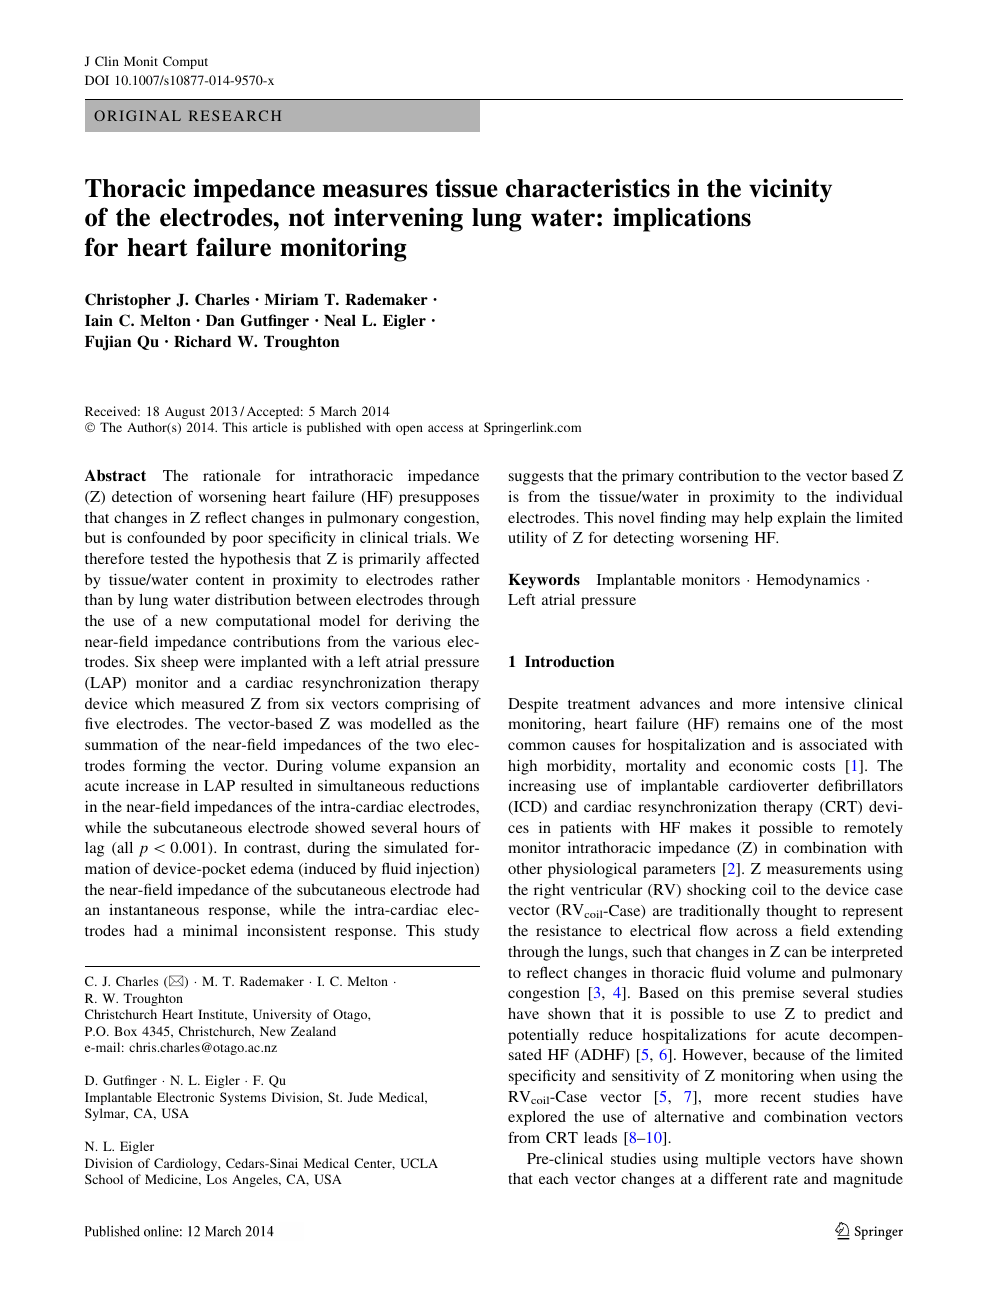 Thoracic Impedance Measures Tissue Characteristics In The Vicinity Of The Electrodes Not Intervening Lung Water Implications For Heart Failure Monitoring Topic Of Research Paper In Medical Engineering Download Scholarly Article Pdf